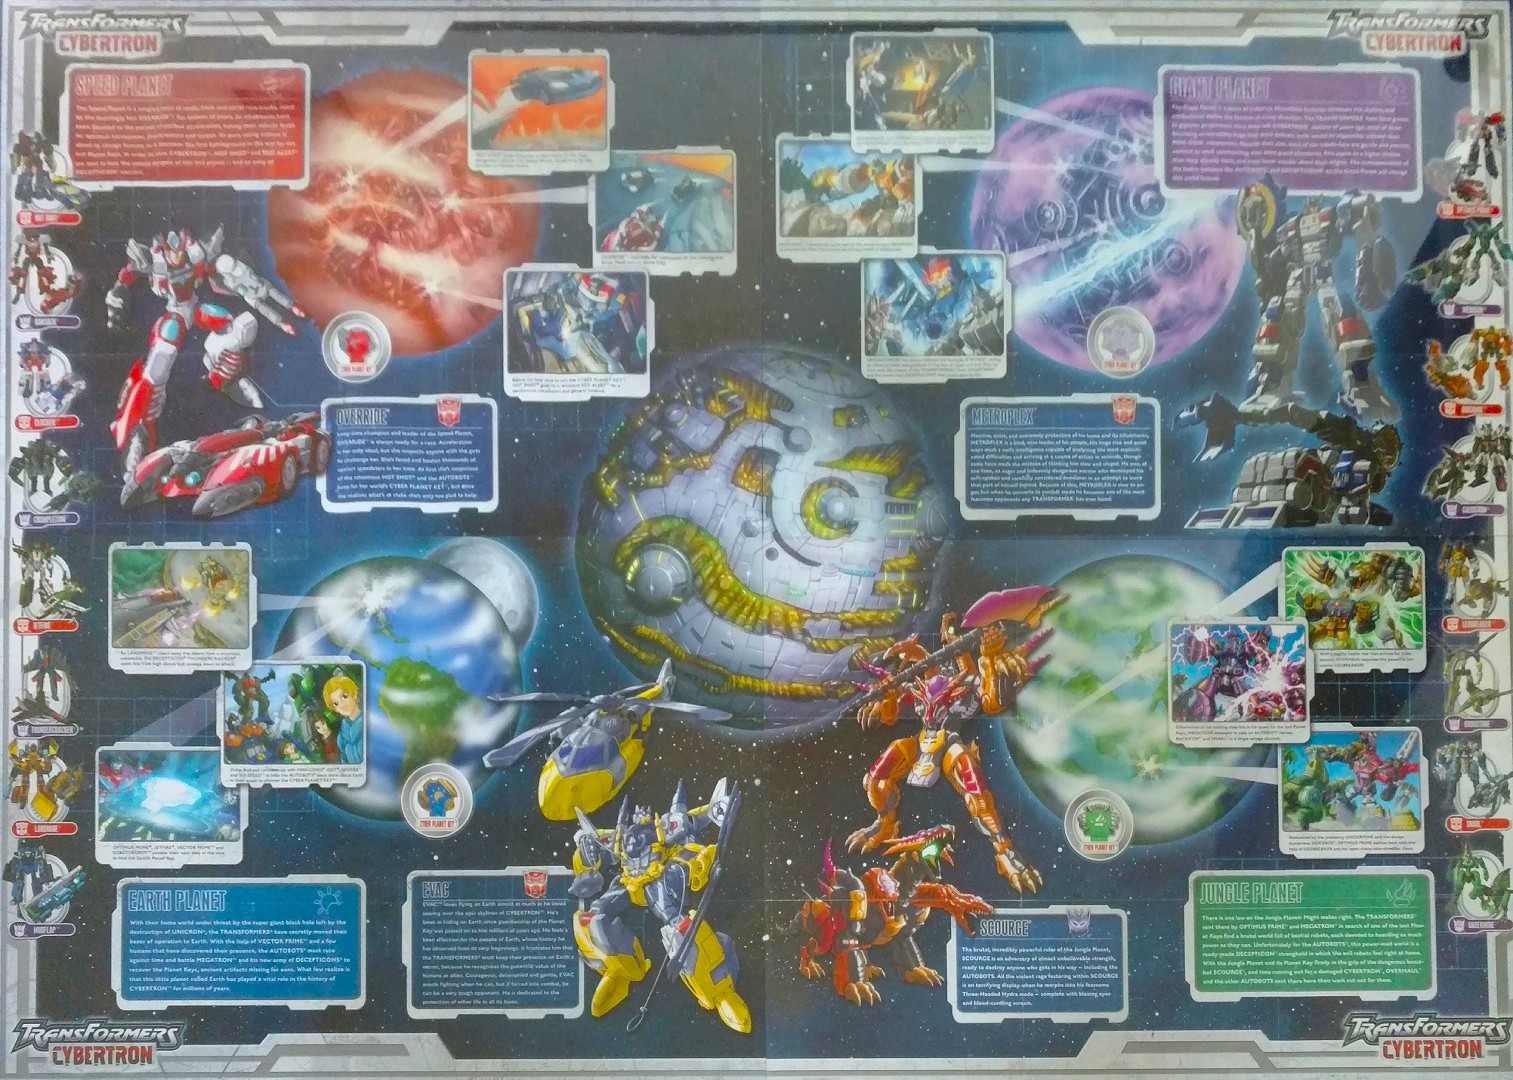 Four catalogs from Transformers: Cybertron, assembled to form a promotional map of the series' planets.